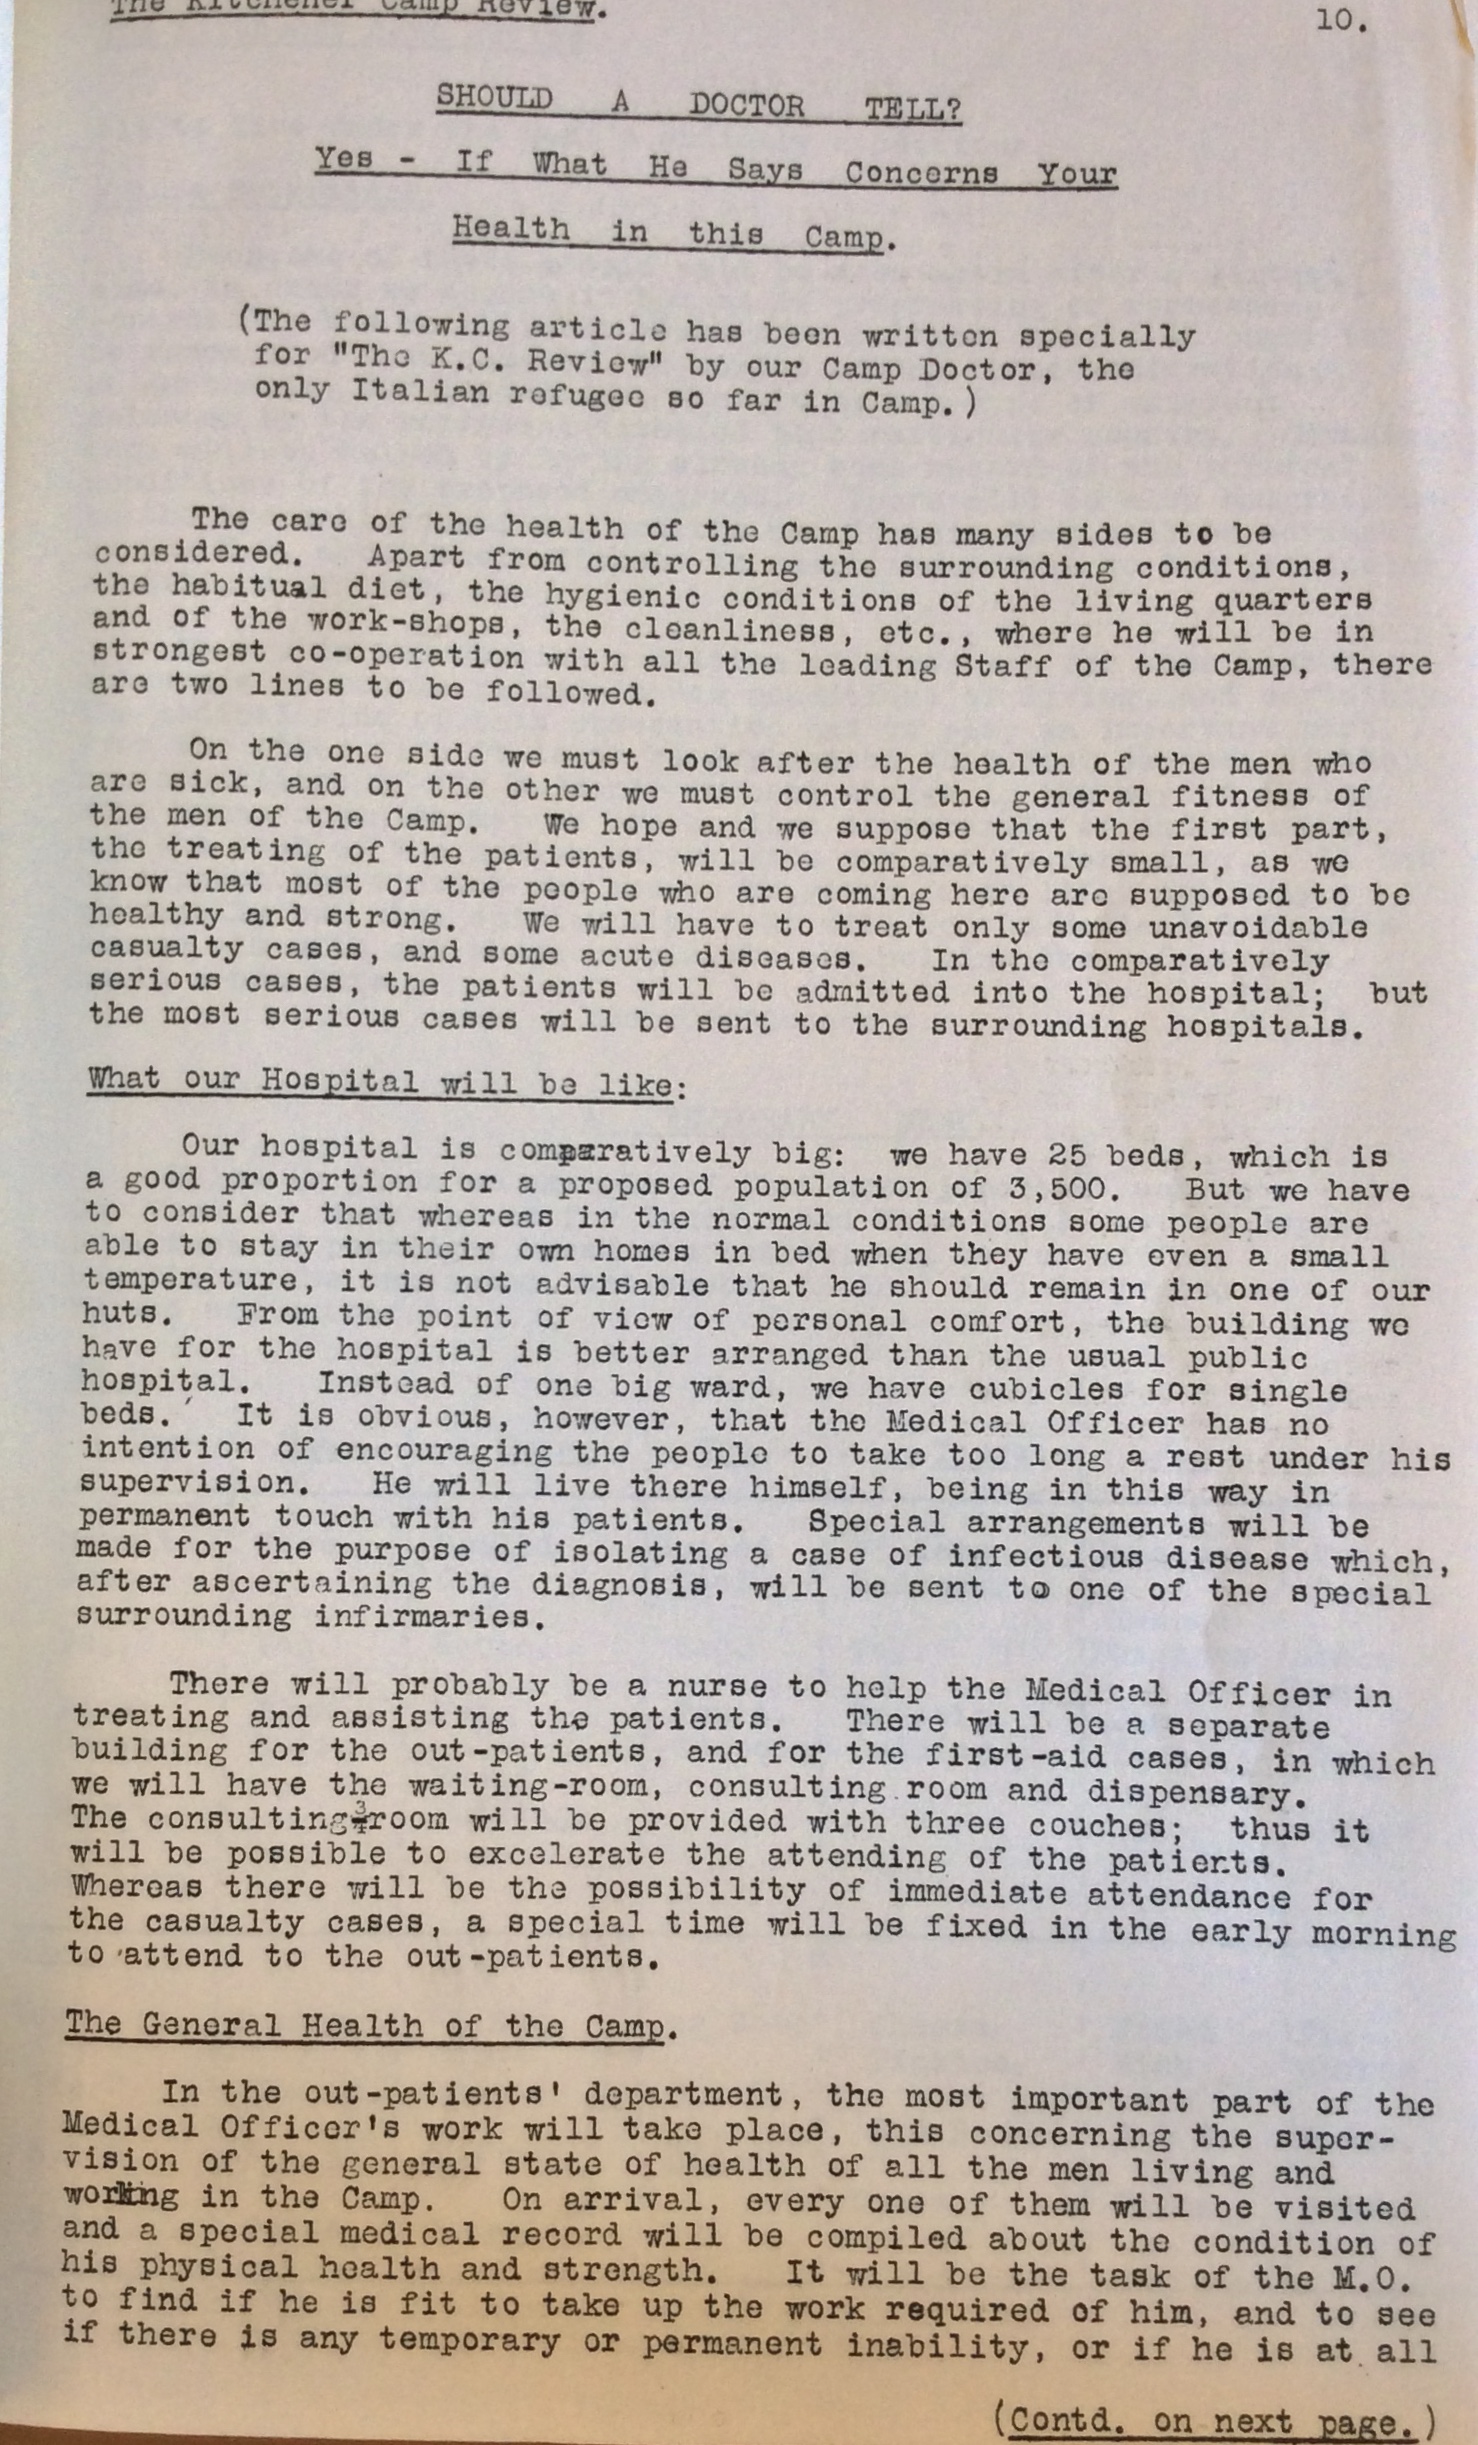 Kitchener Camp Review, No. 1, March 1939, page 10